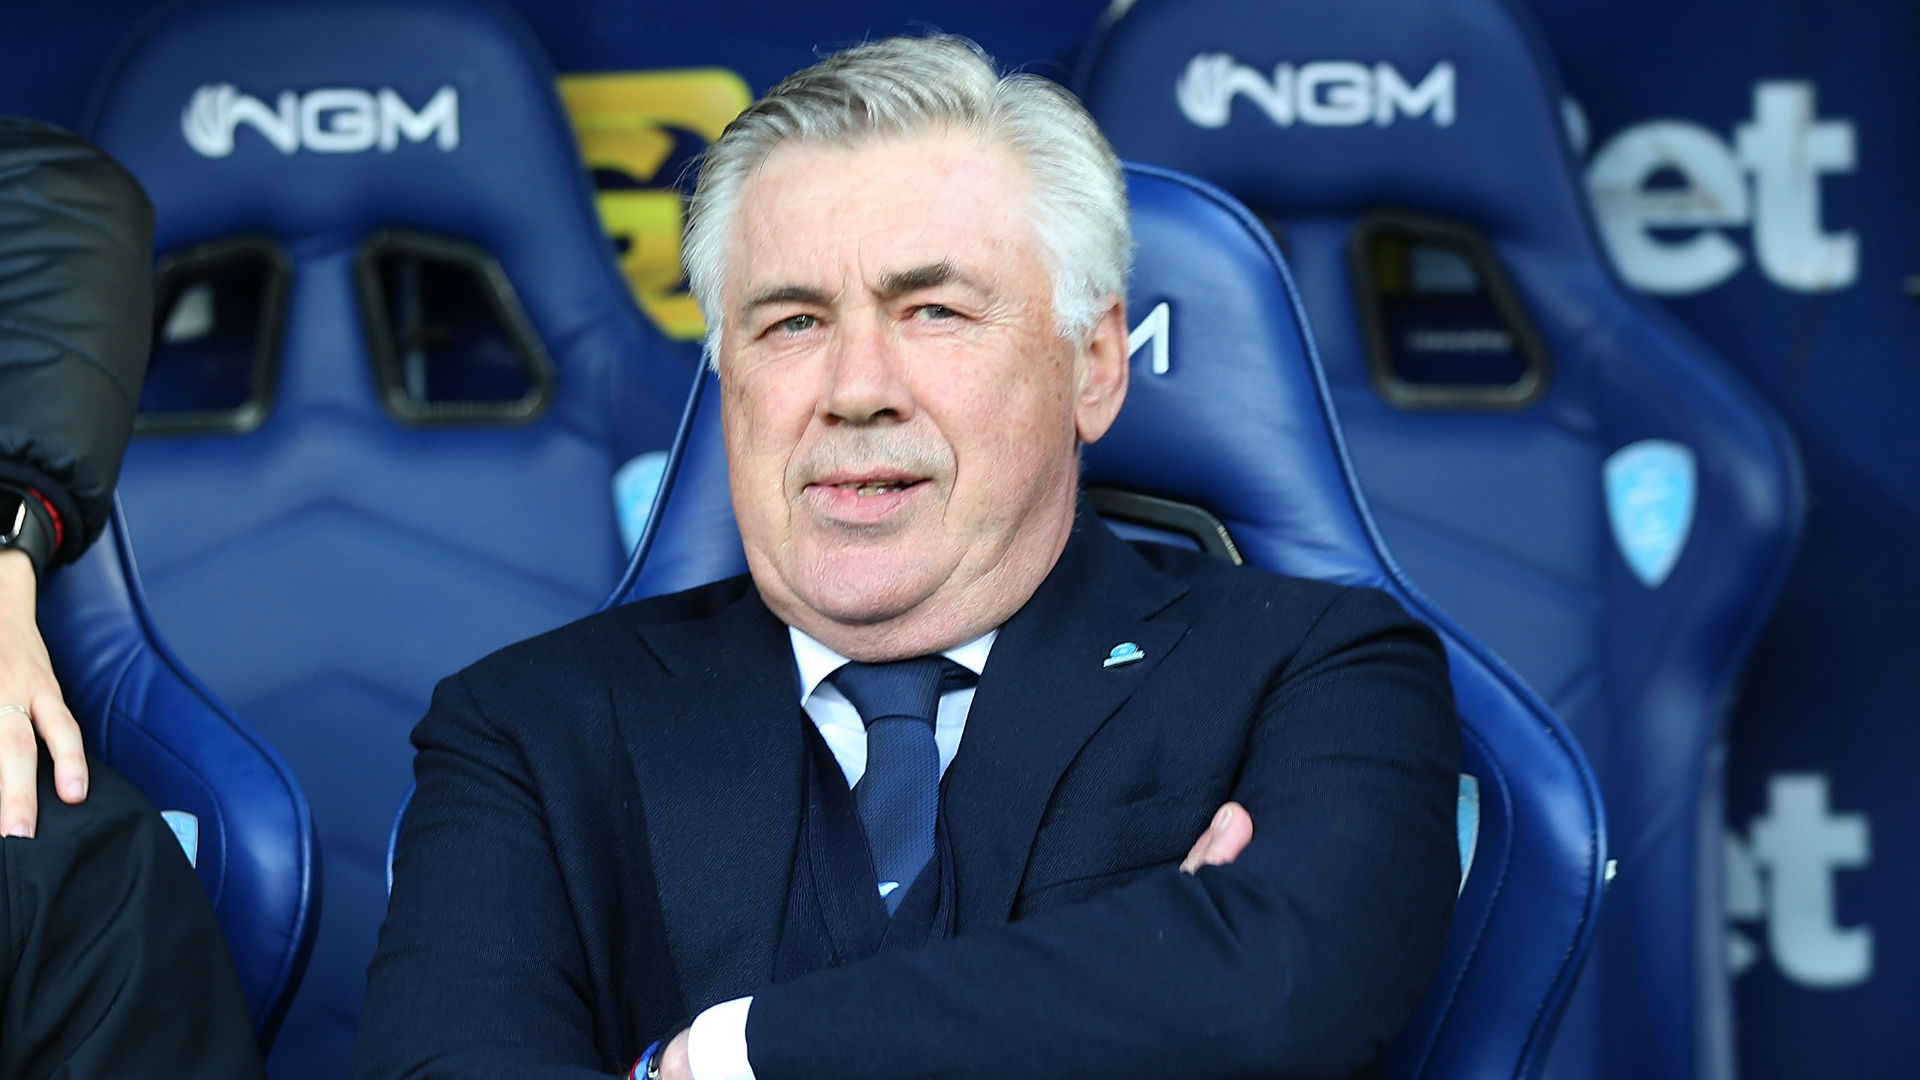 Juventus are seeking a replacement for Massimiliano Allegri, but Carlo Ancelotti appears to have no desire to leave Napoli.